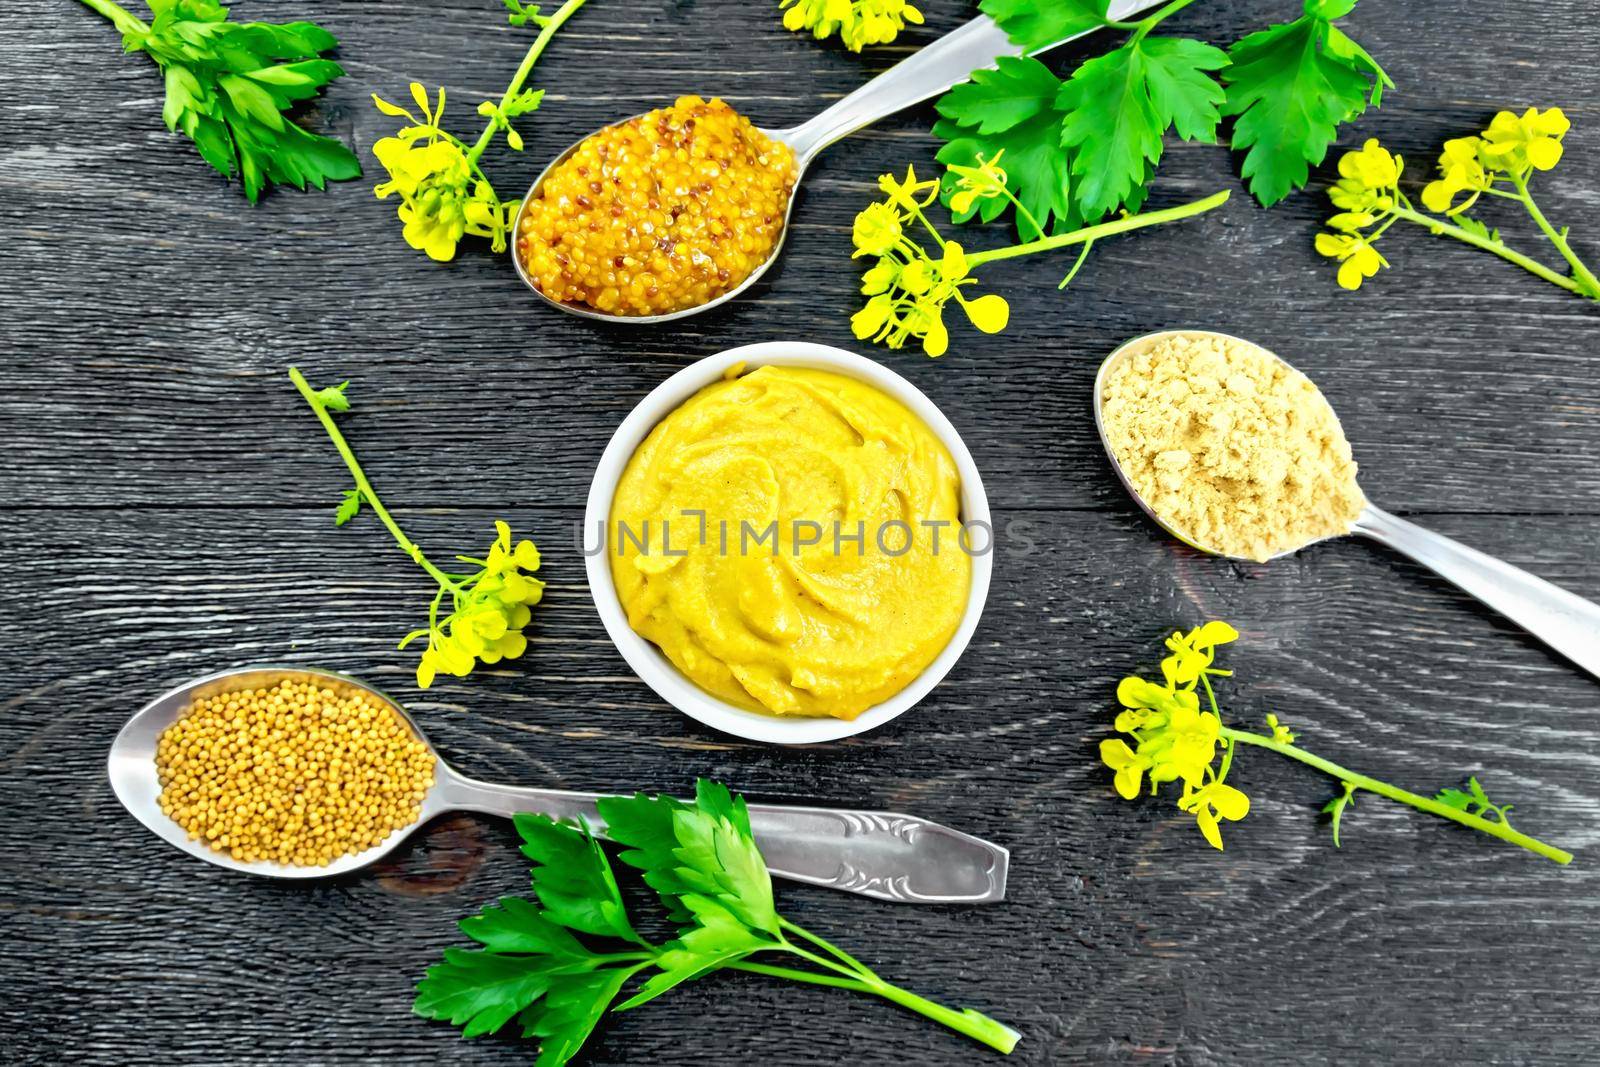 Mustard granular, powder, seeds in spoons and mustard sauce in a bowl, yellow flowers and parsley on the background of a black wooden board from above